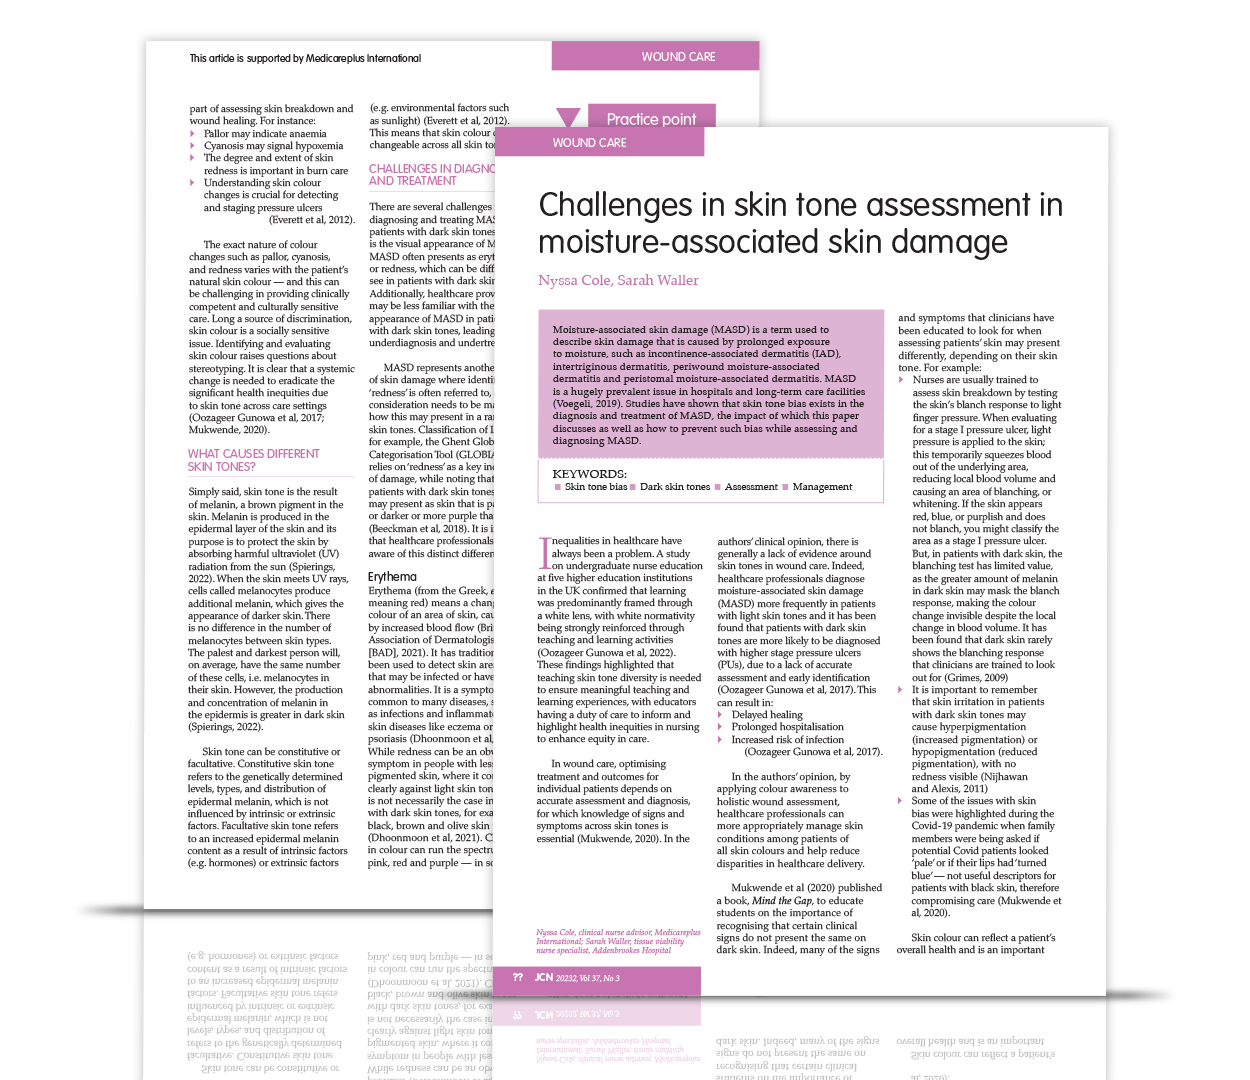 Challenges in skin tone assessment in moisture-associated skin damage